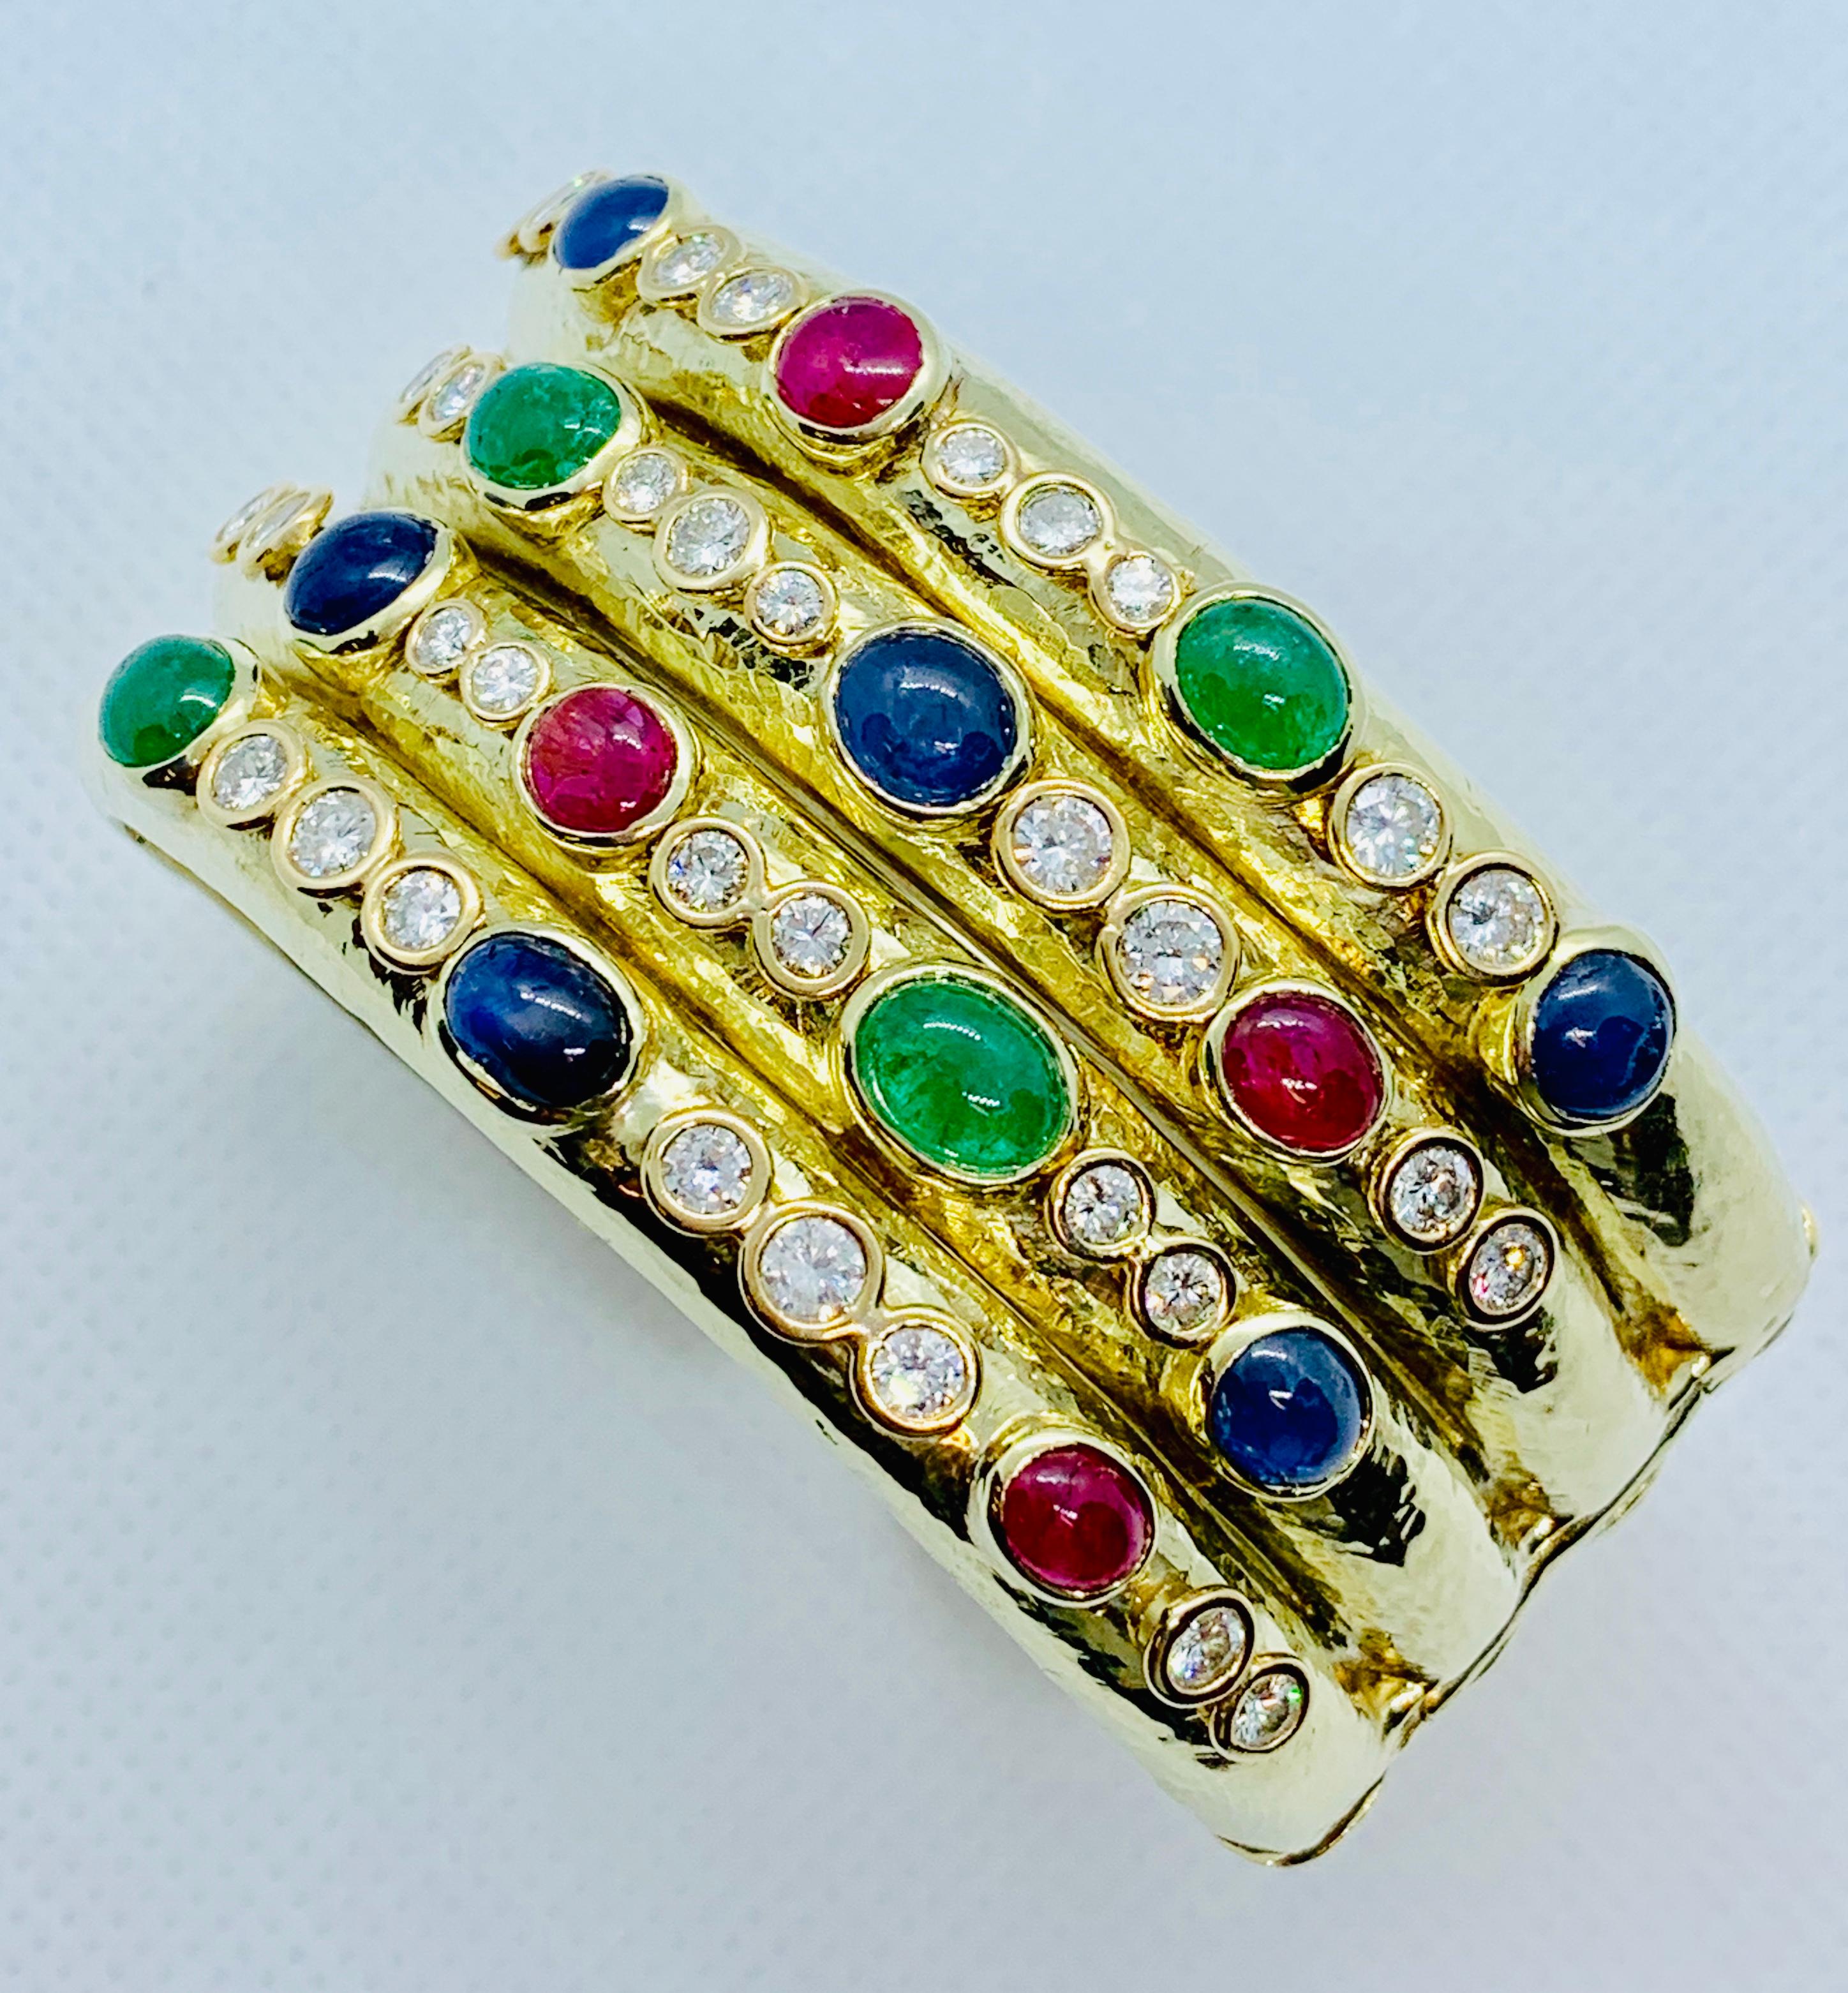 This bracelet is absolutely stunning! This is a double hinged, 30mm Wide Cuff. This piece has unmatched craftsmanship. It has no hallmarks but has been acid tested as 14K Yellow Gold. We believe this was originally a privately commissioned piece.